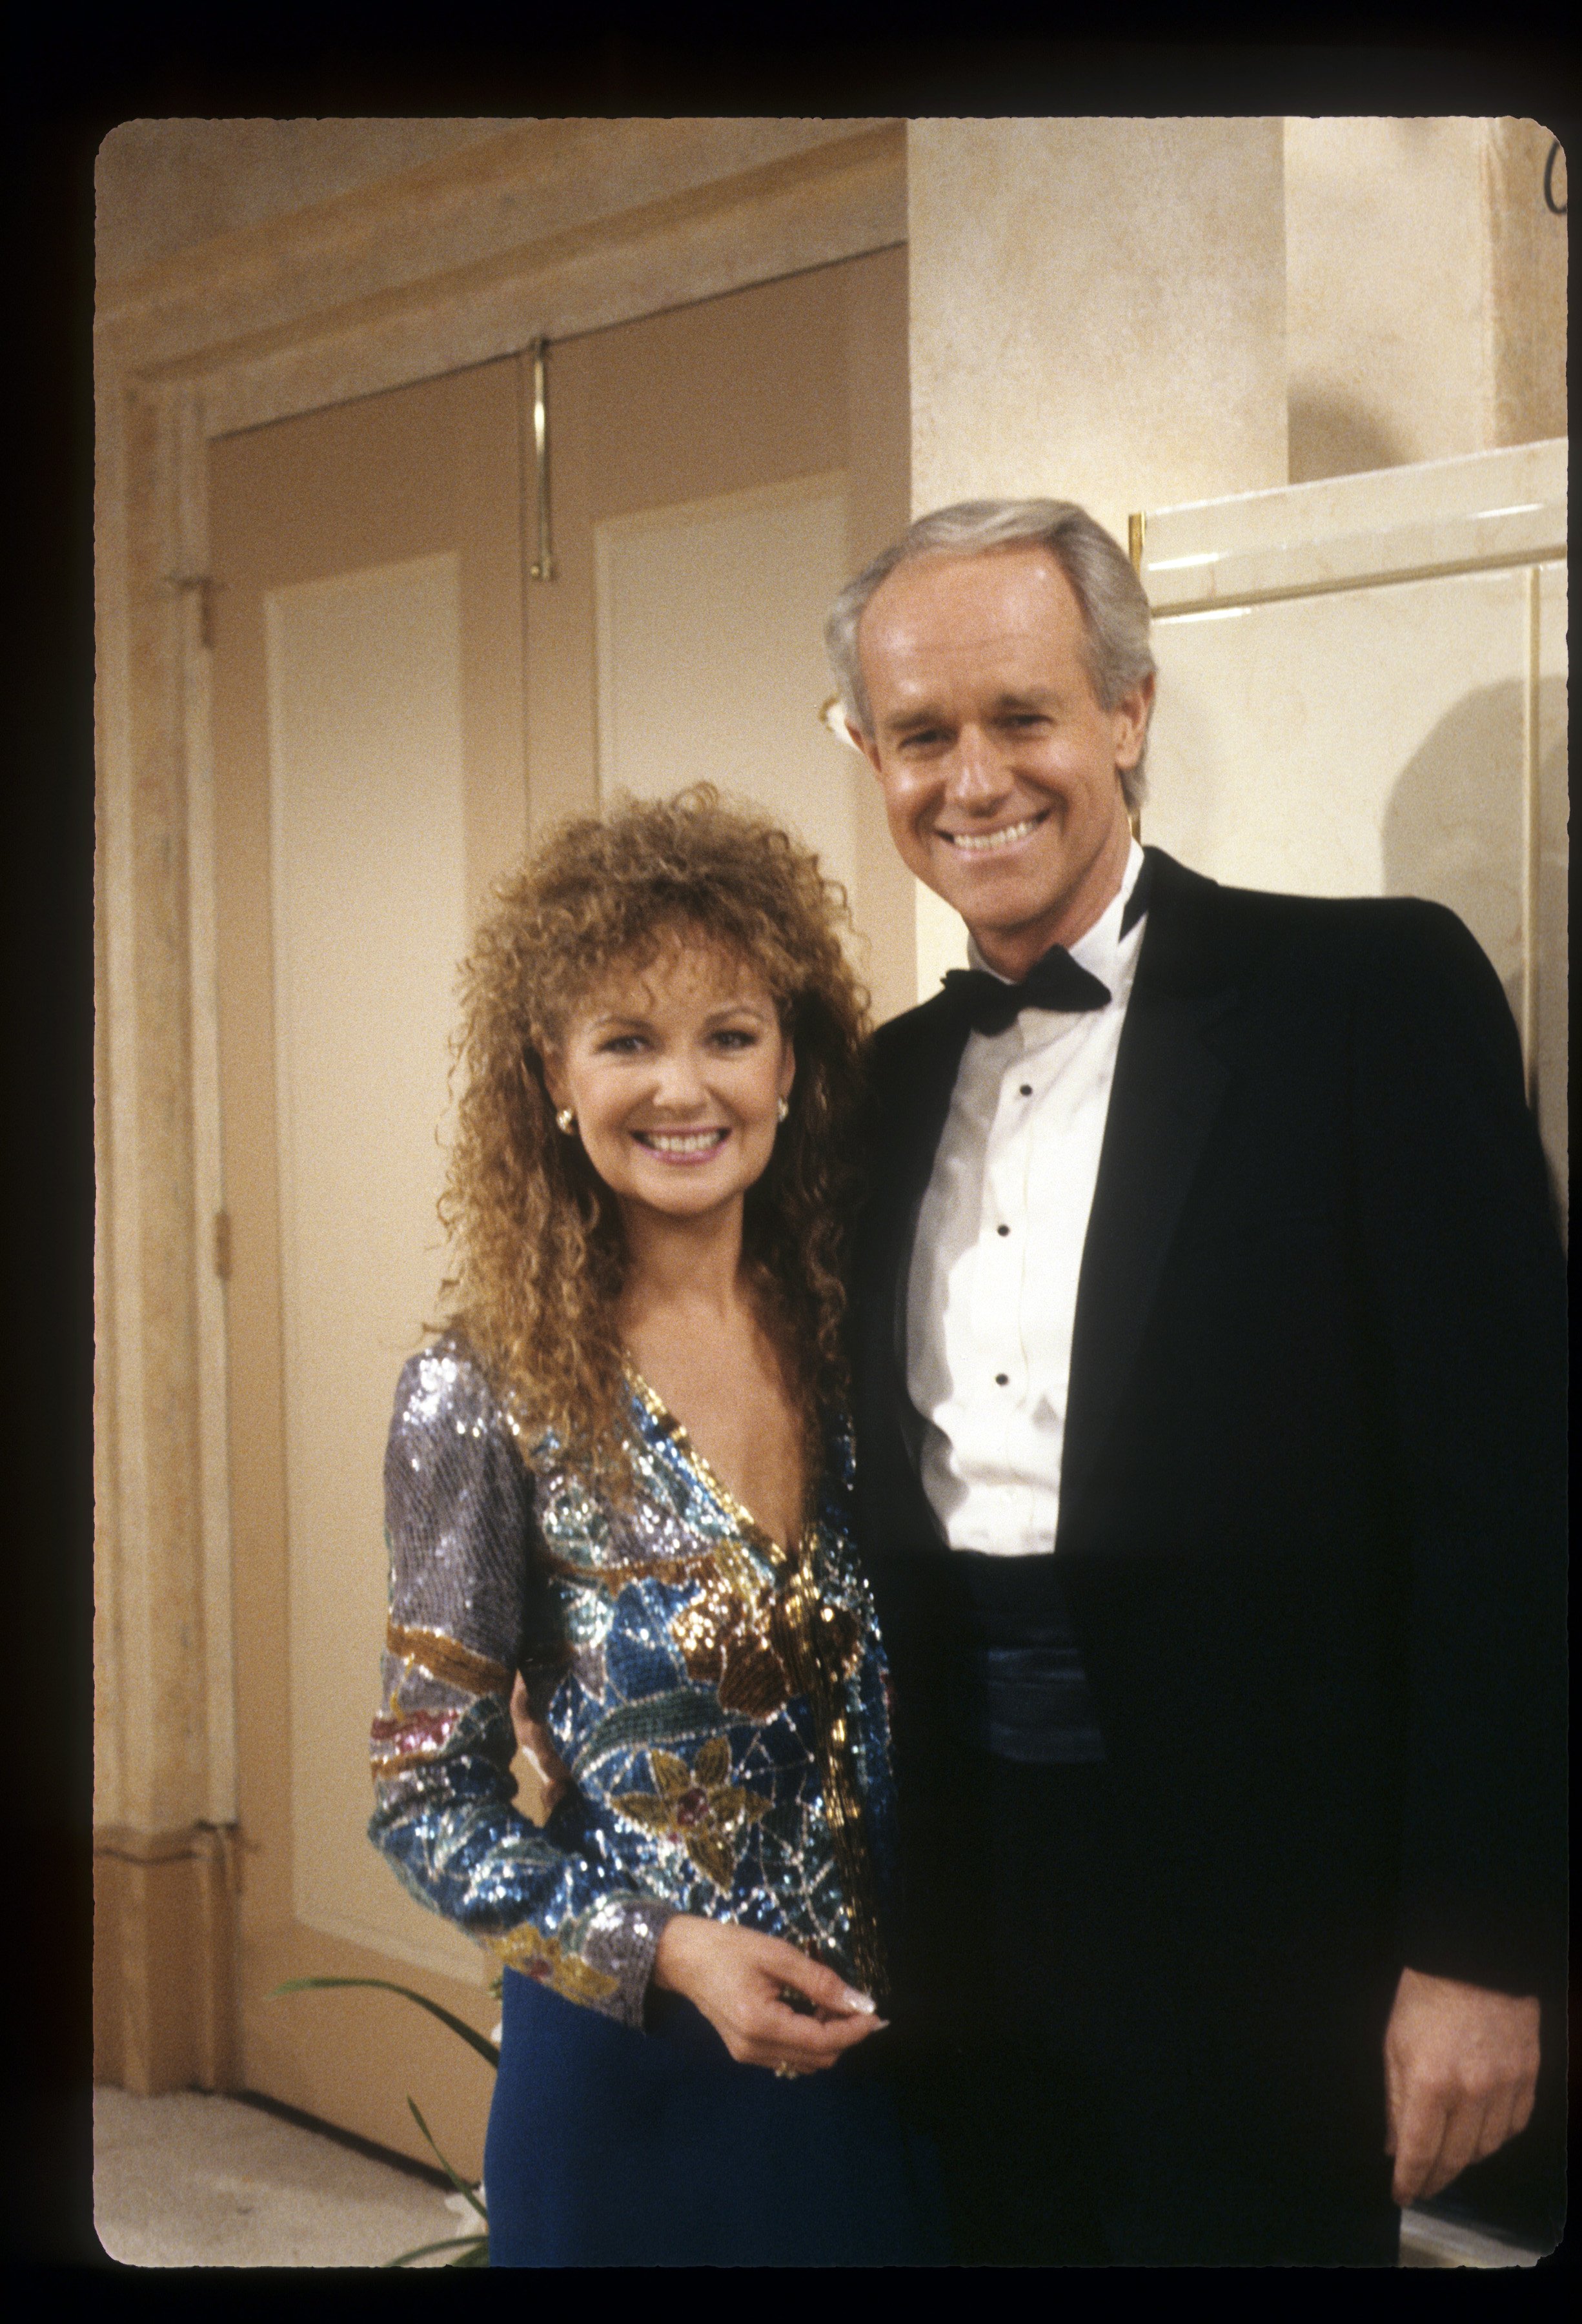 Actress Shelley Fabares and actor Mike Farrell in the TV series, "Coach" on April 17, 1990 ┃Source: Getty Images